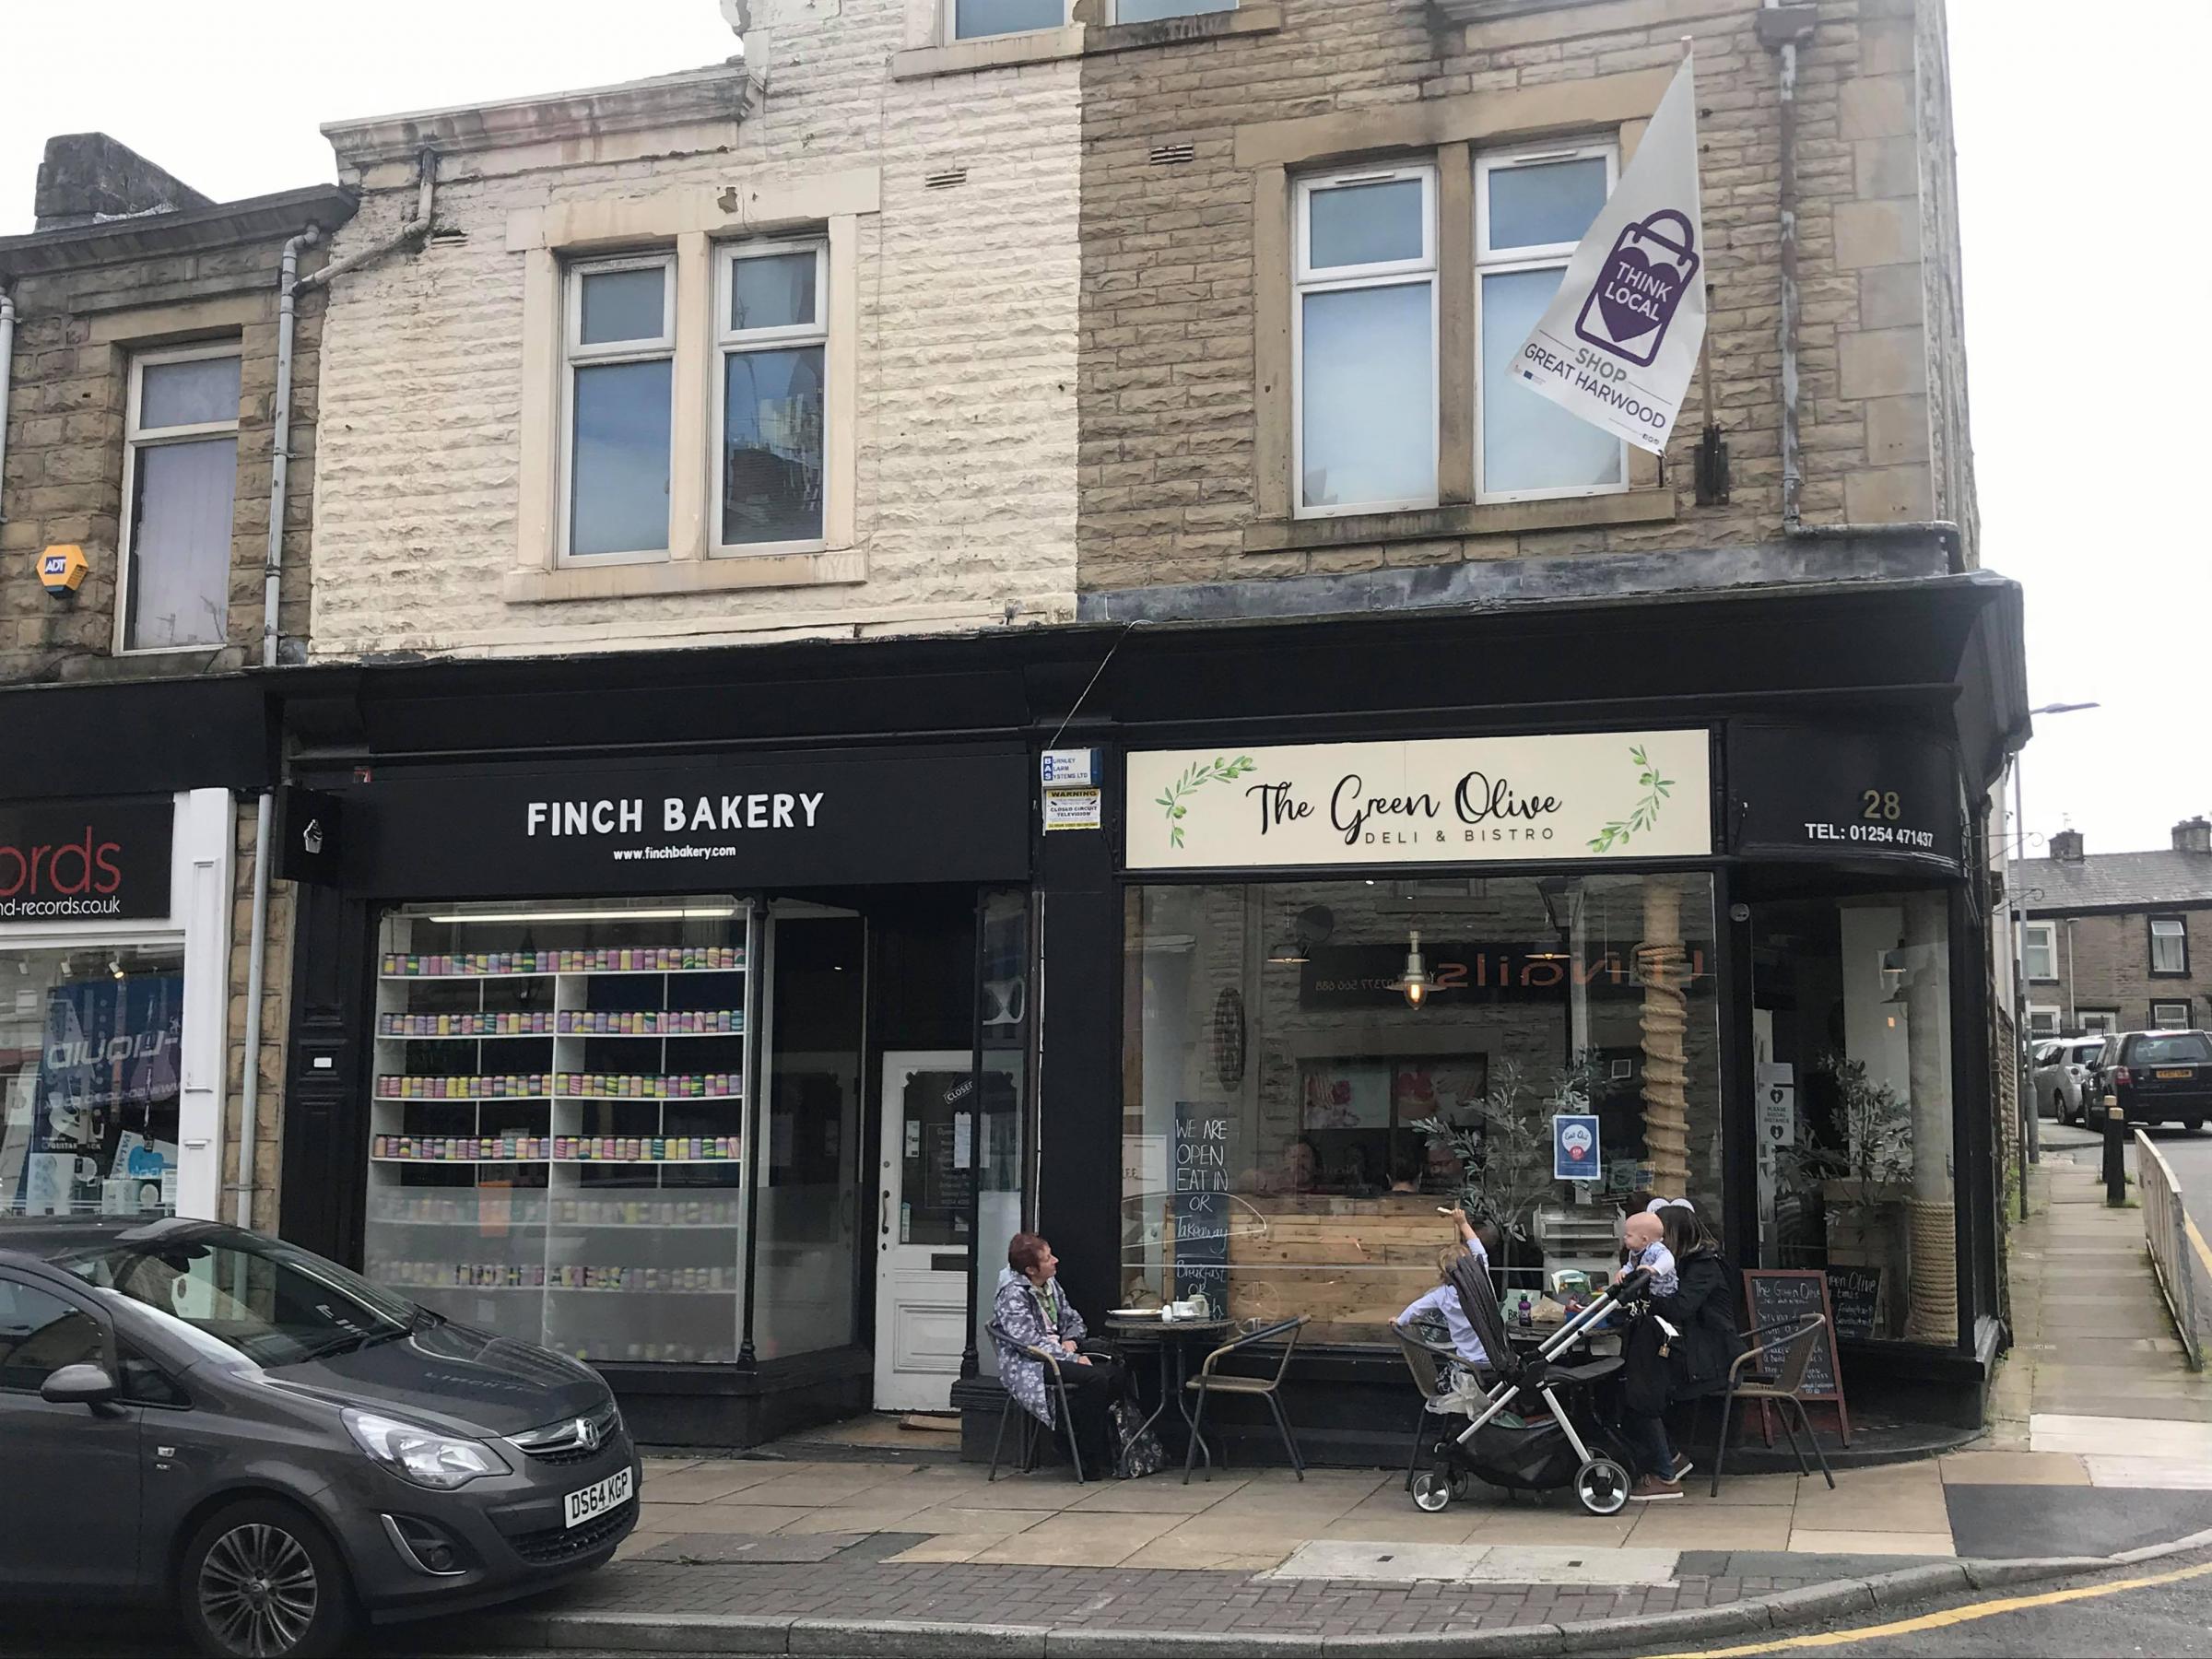 The Green Olive and Finch Bakery